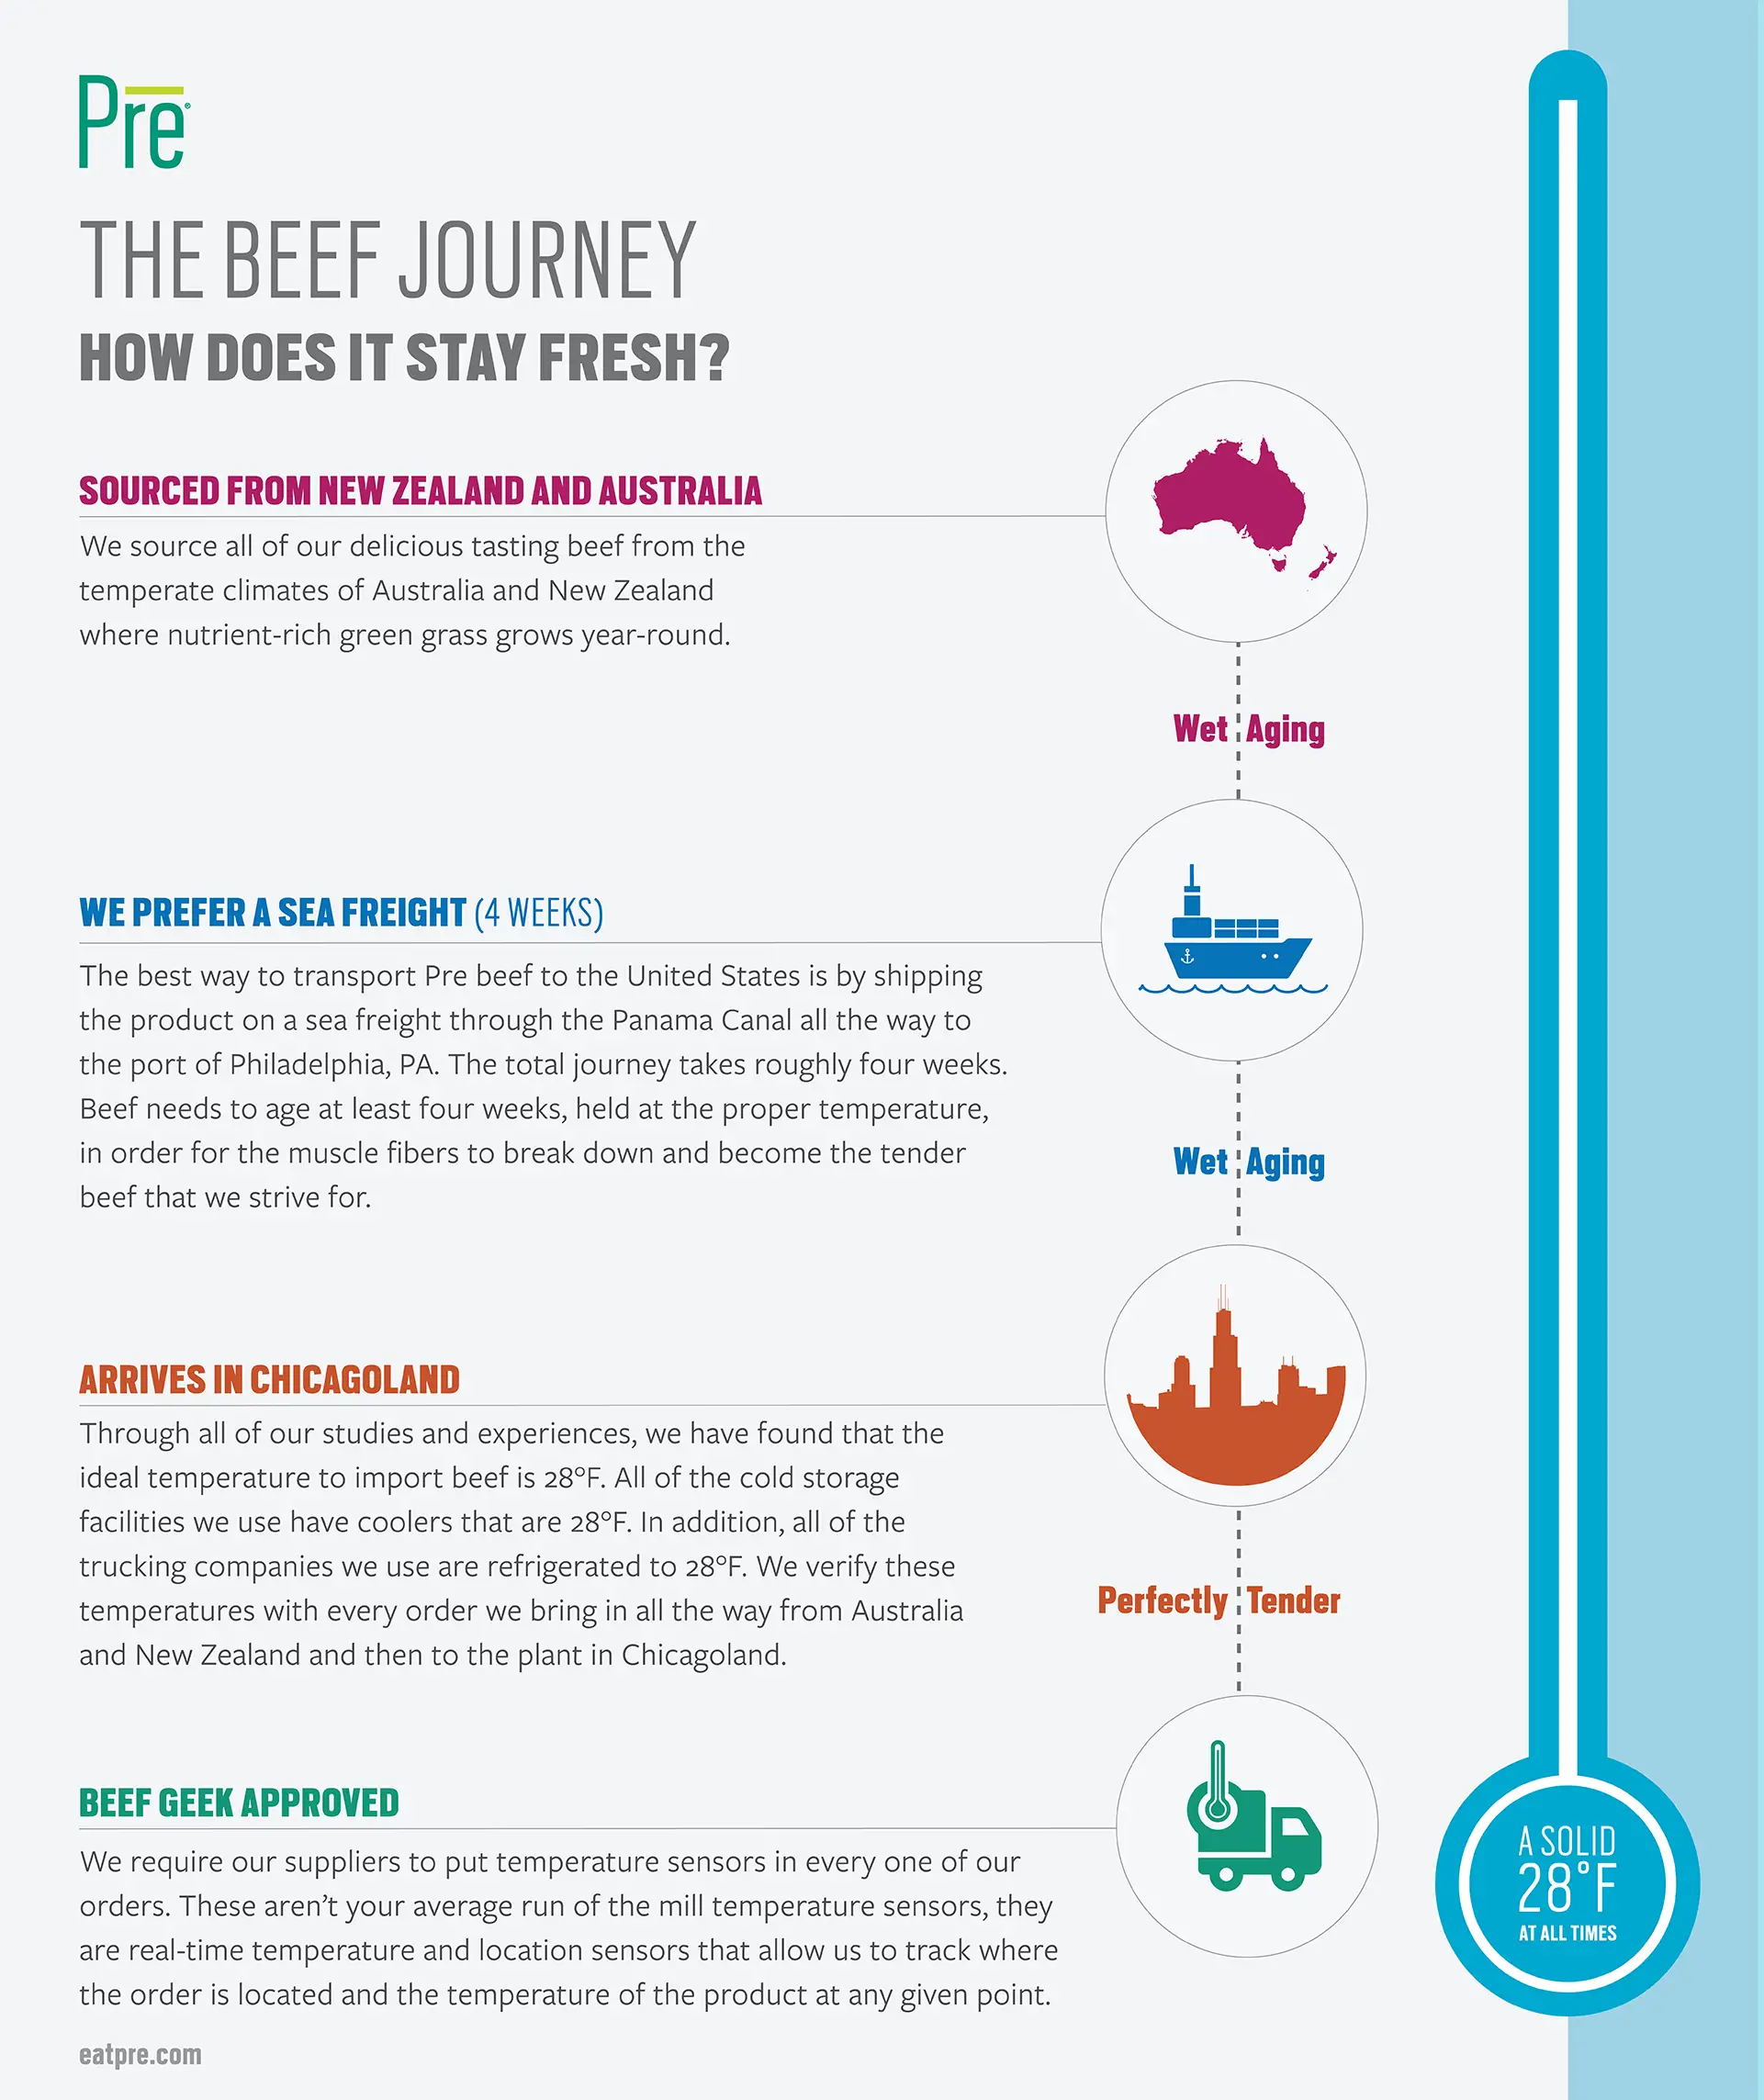 What is the difference between Wet Aging and Dry Aging Beef?